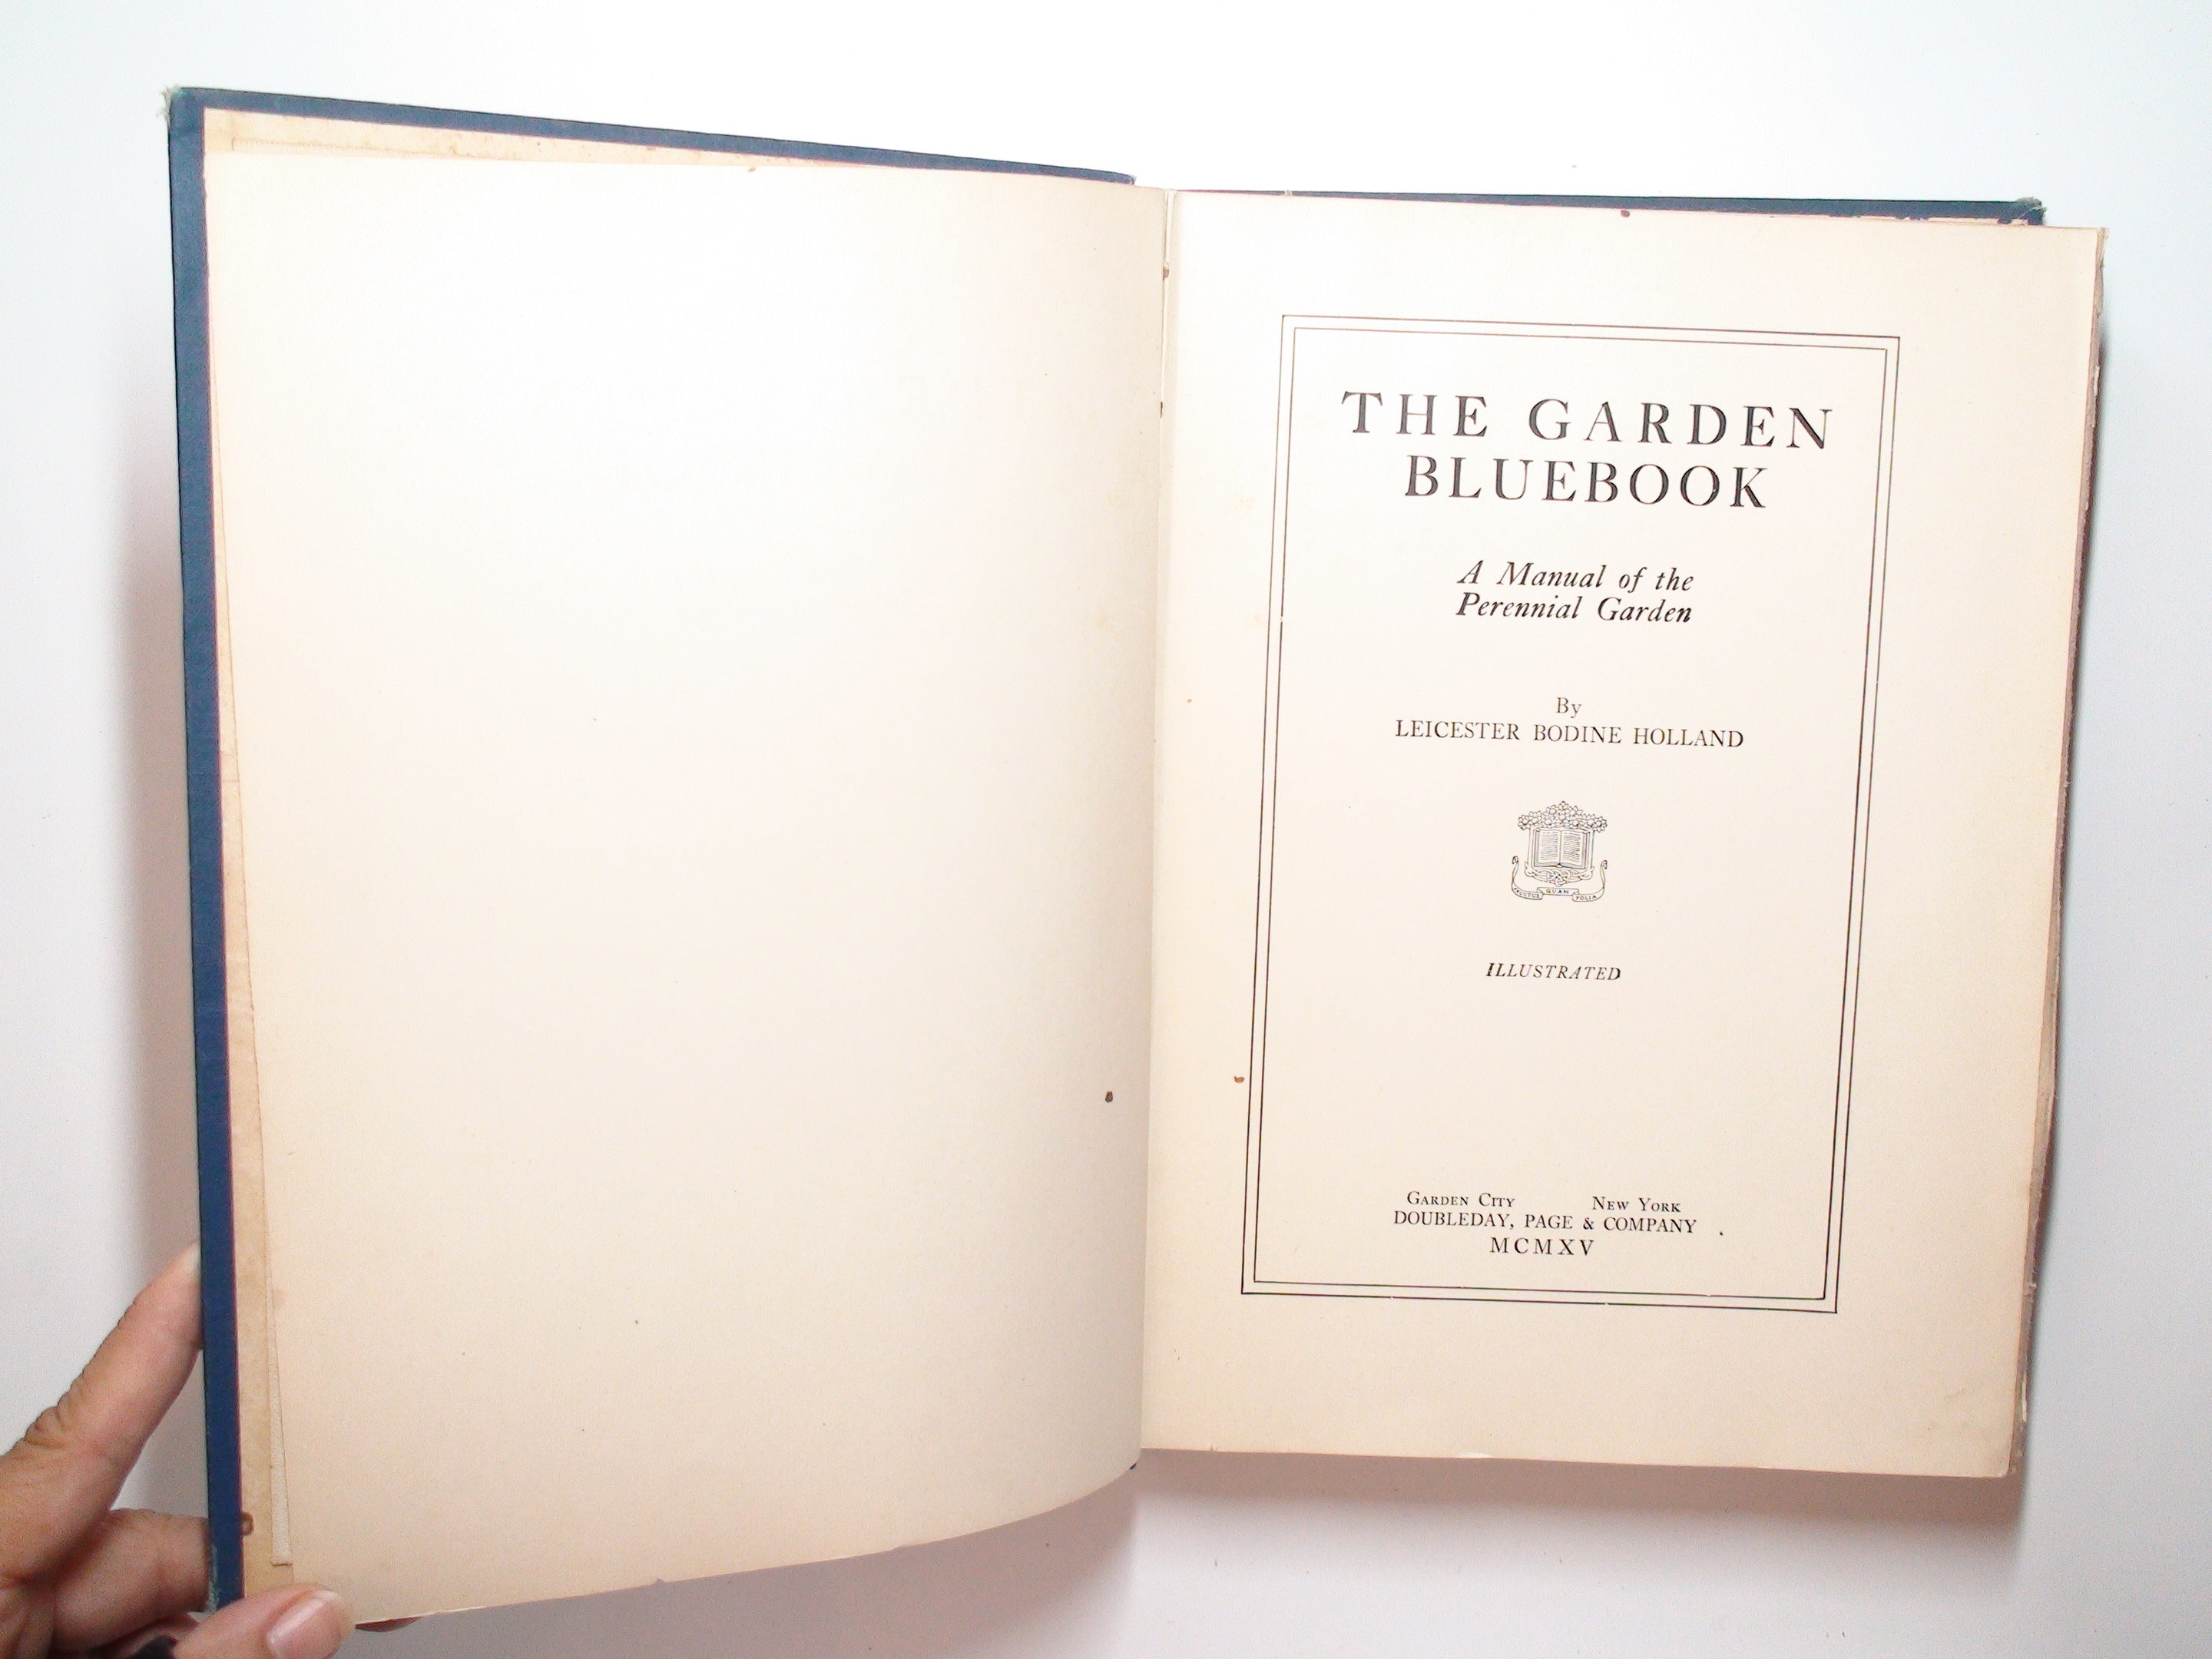 The Garden Bluebook, by Leicester Bodine Holland, Illustrated, 1915